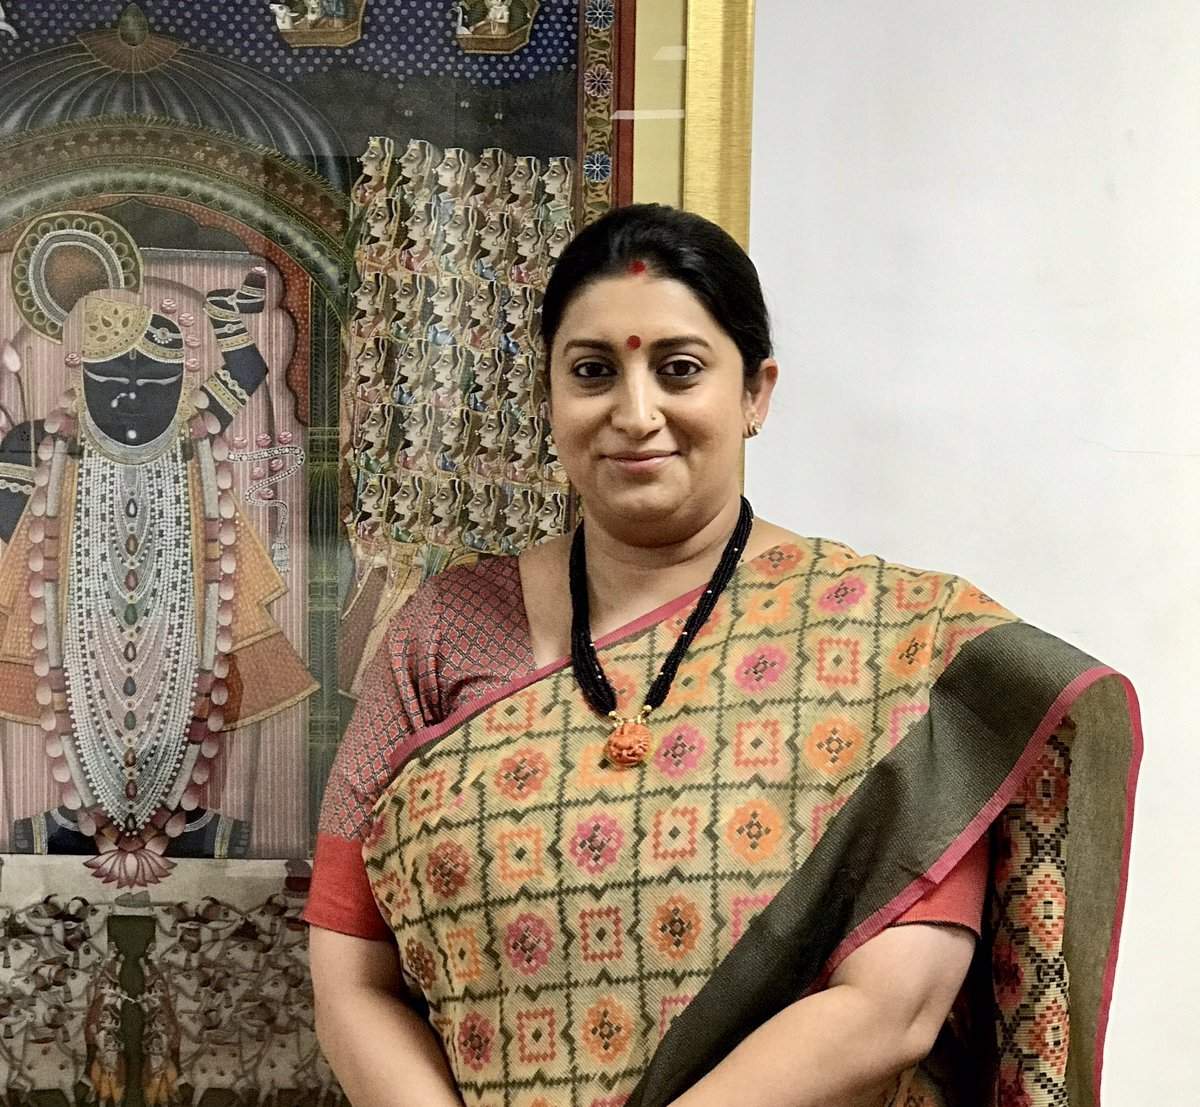 Wearing Cotton and posting pictures ? Smriti Irani is the trend setter #CottonIsCool